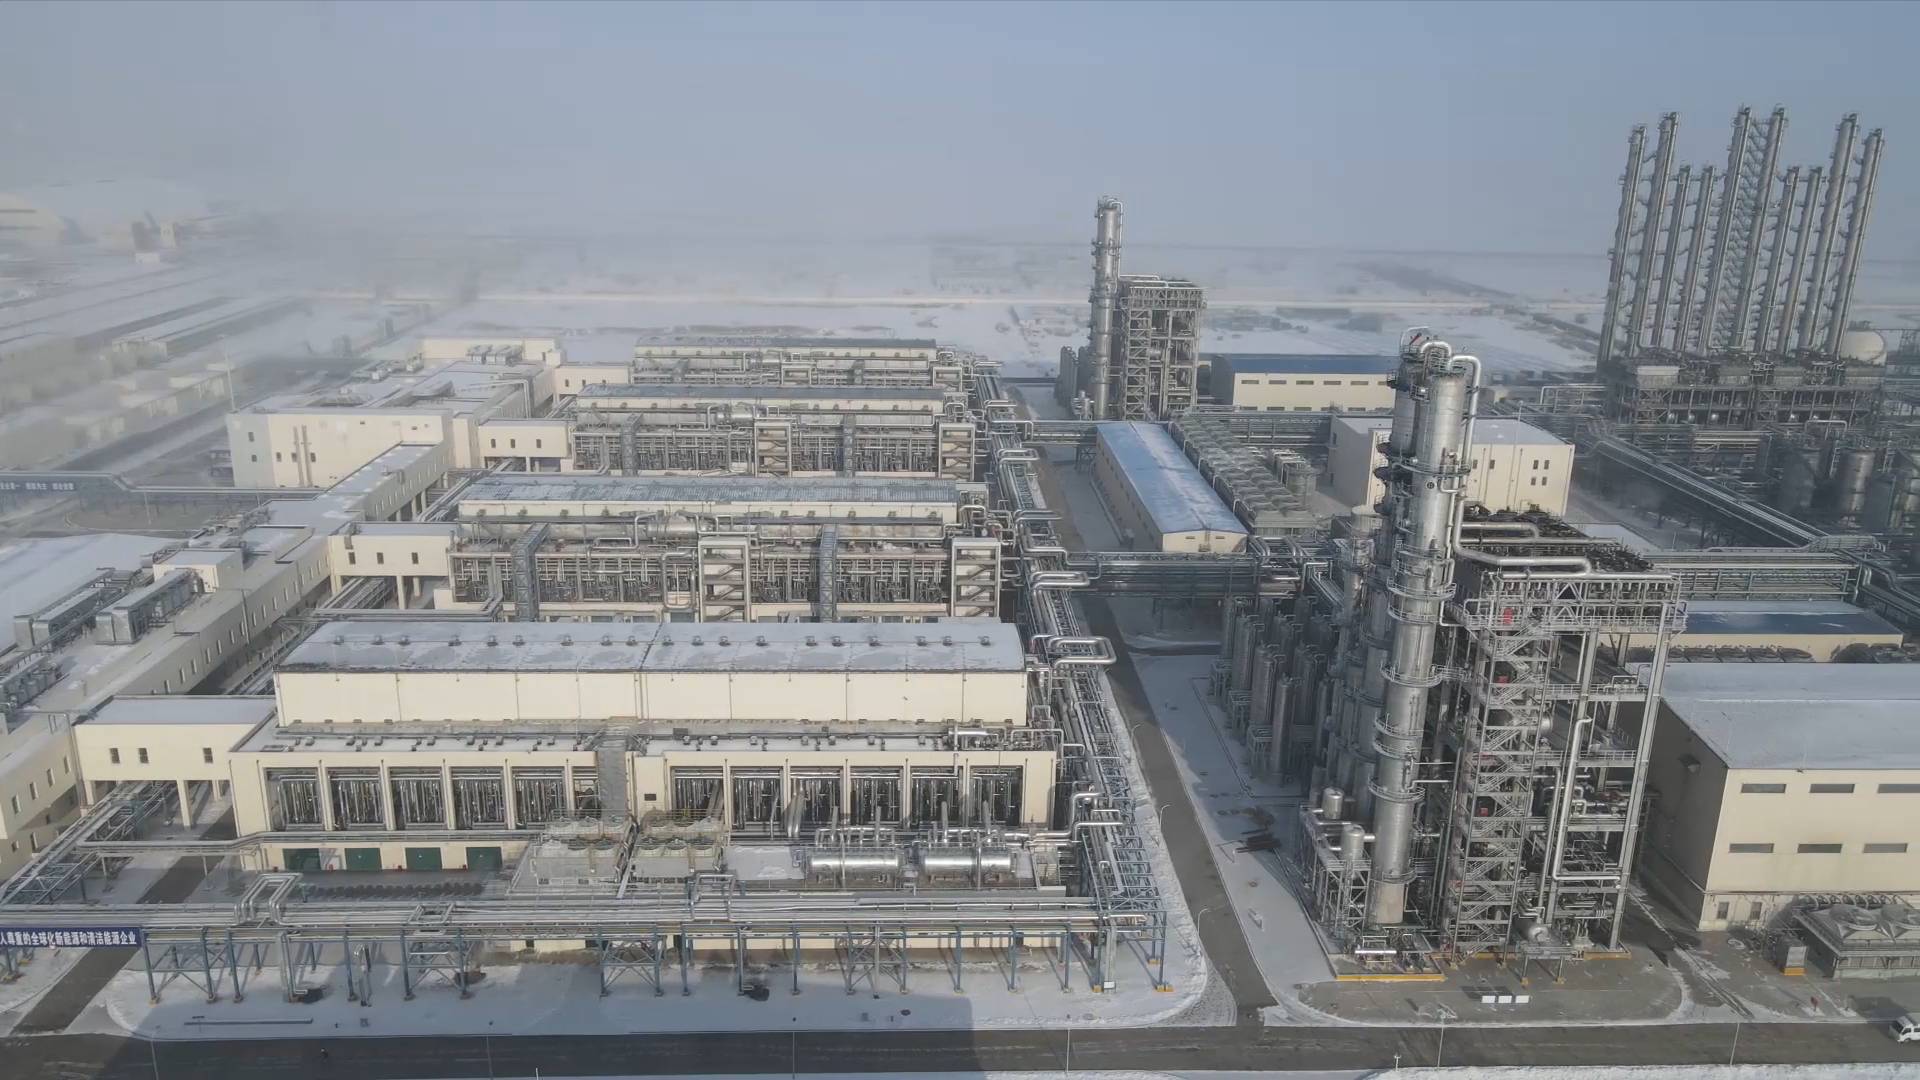 GLOBALink | Let the truth beam: A revealing trip to U.S.-sanctioned Xinjiang silicon factory